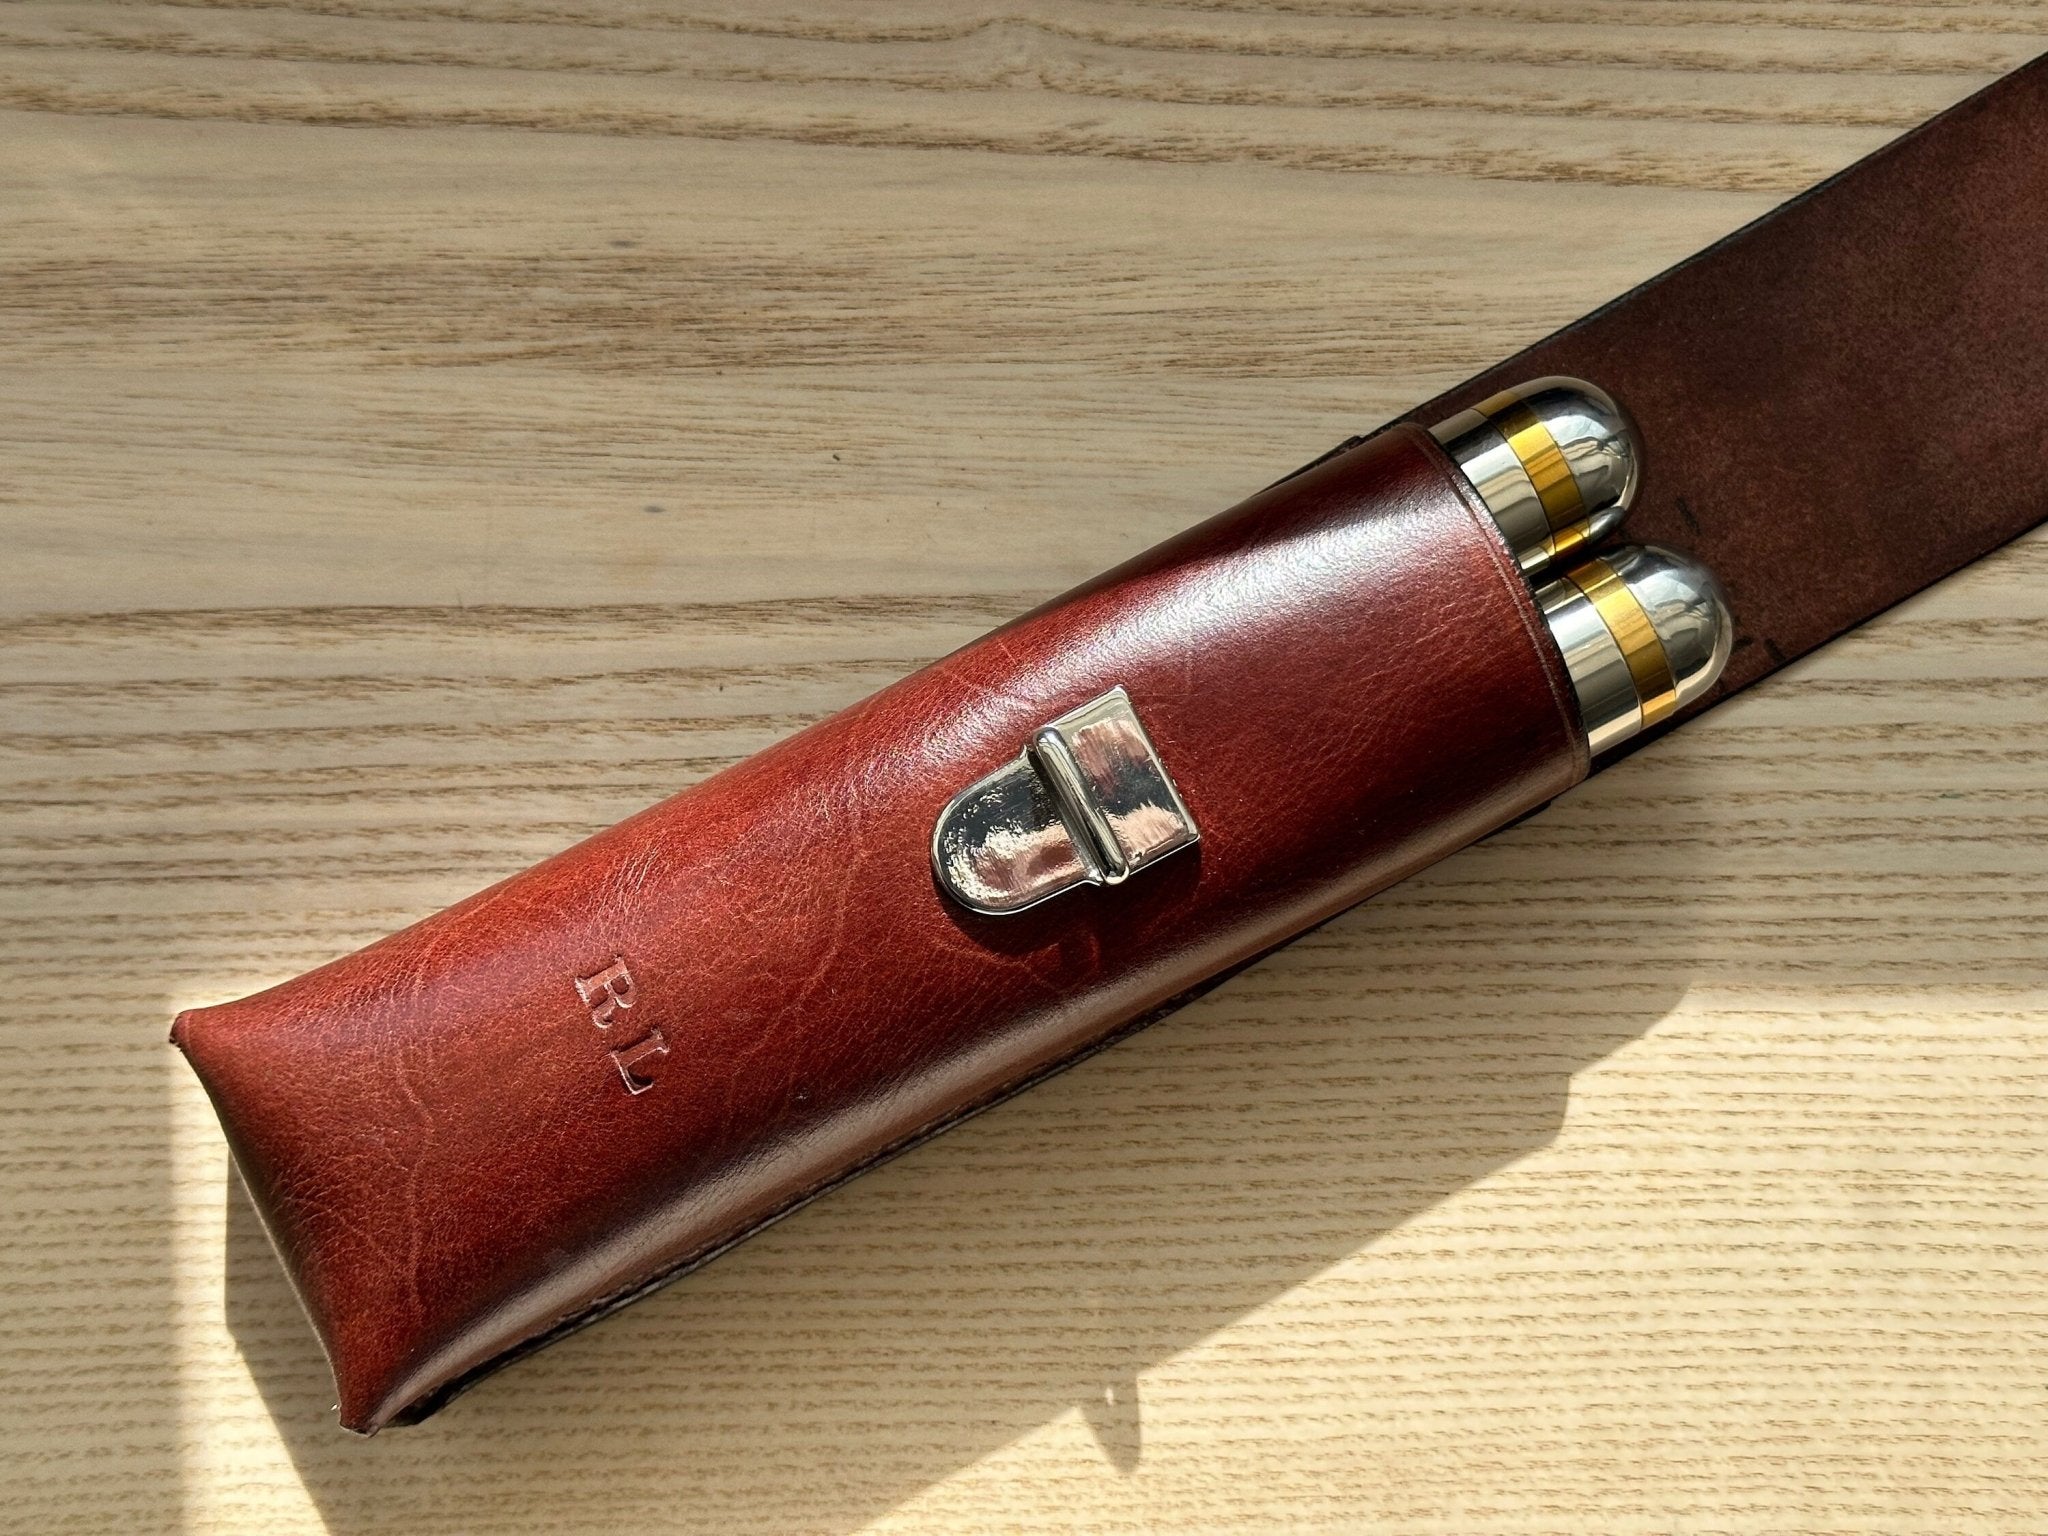 Leather Cigar Case with Cigar Tubes - Handmade Cigar Holder - Personalize with Monogram - A.M. Aiken